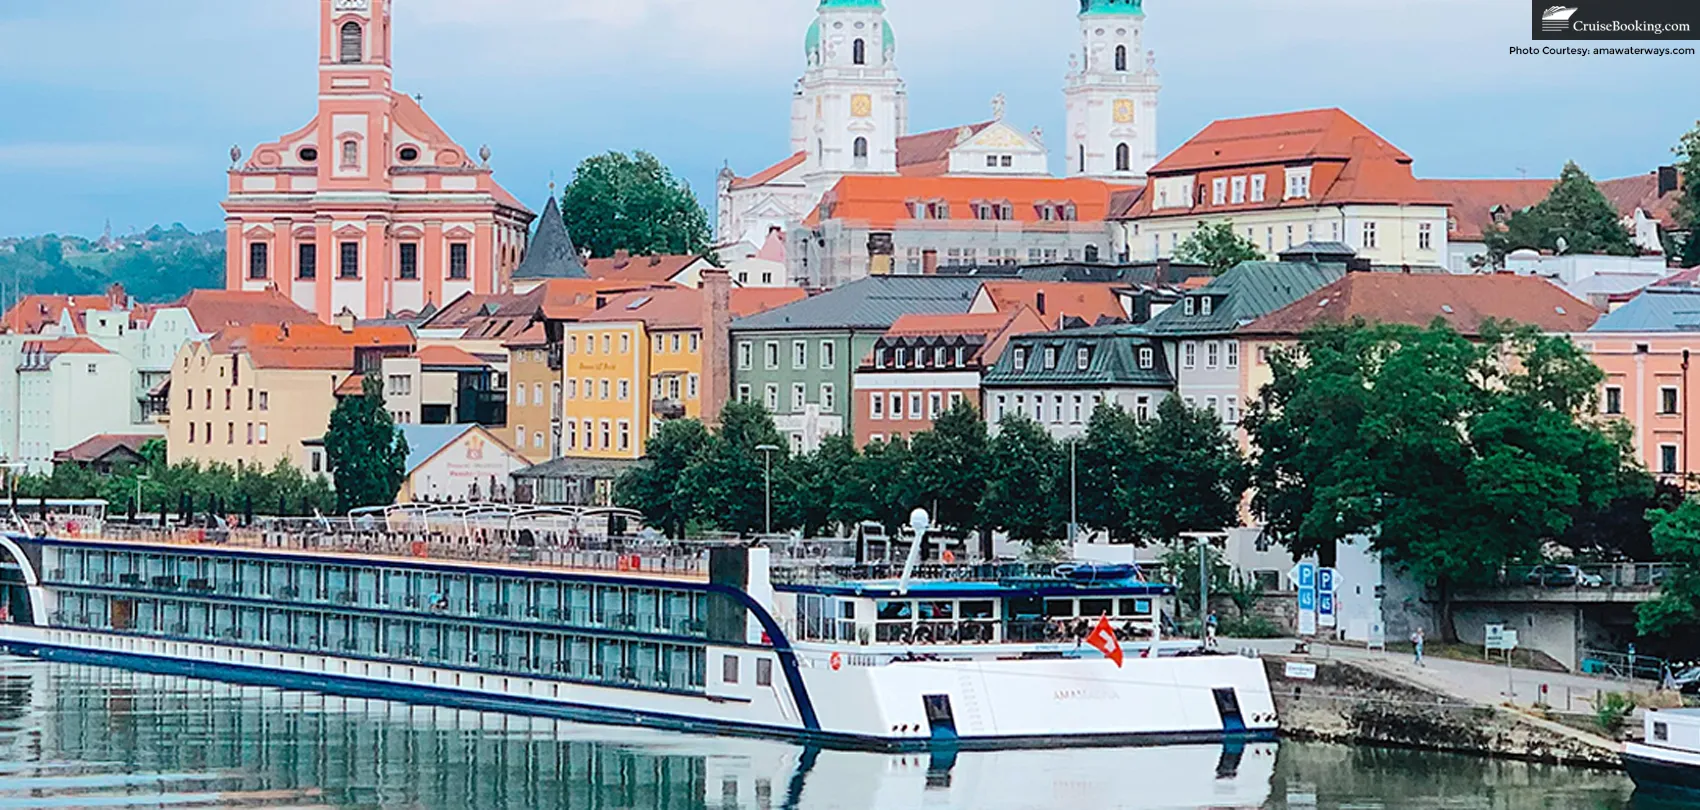 Sustainability is explored by AmaWaterways